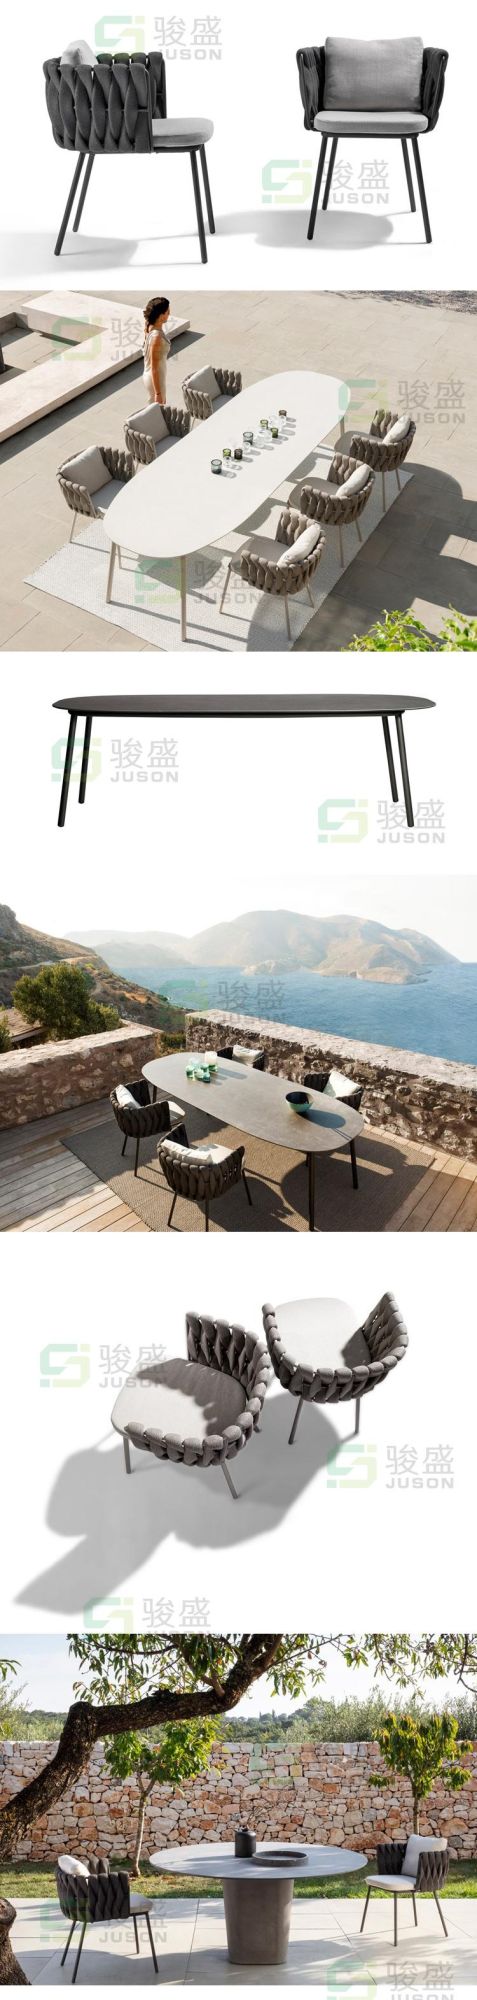 Hot Sale Modern Hotel Outdoor Patio Dining Table Set Rattan Garden Furniture Living Room Dining Chair